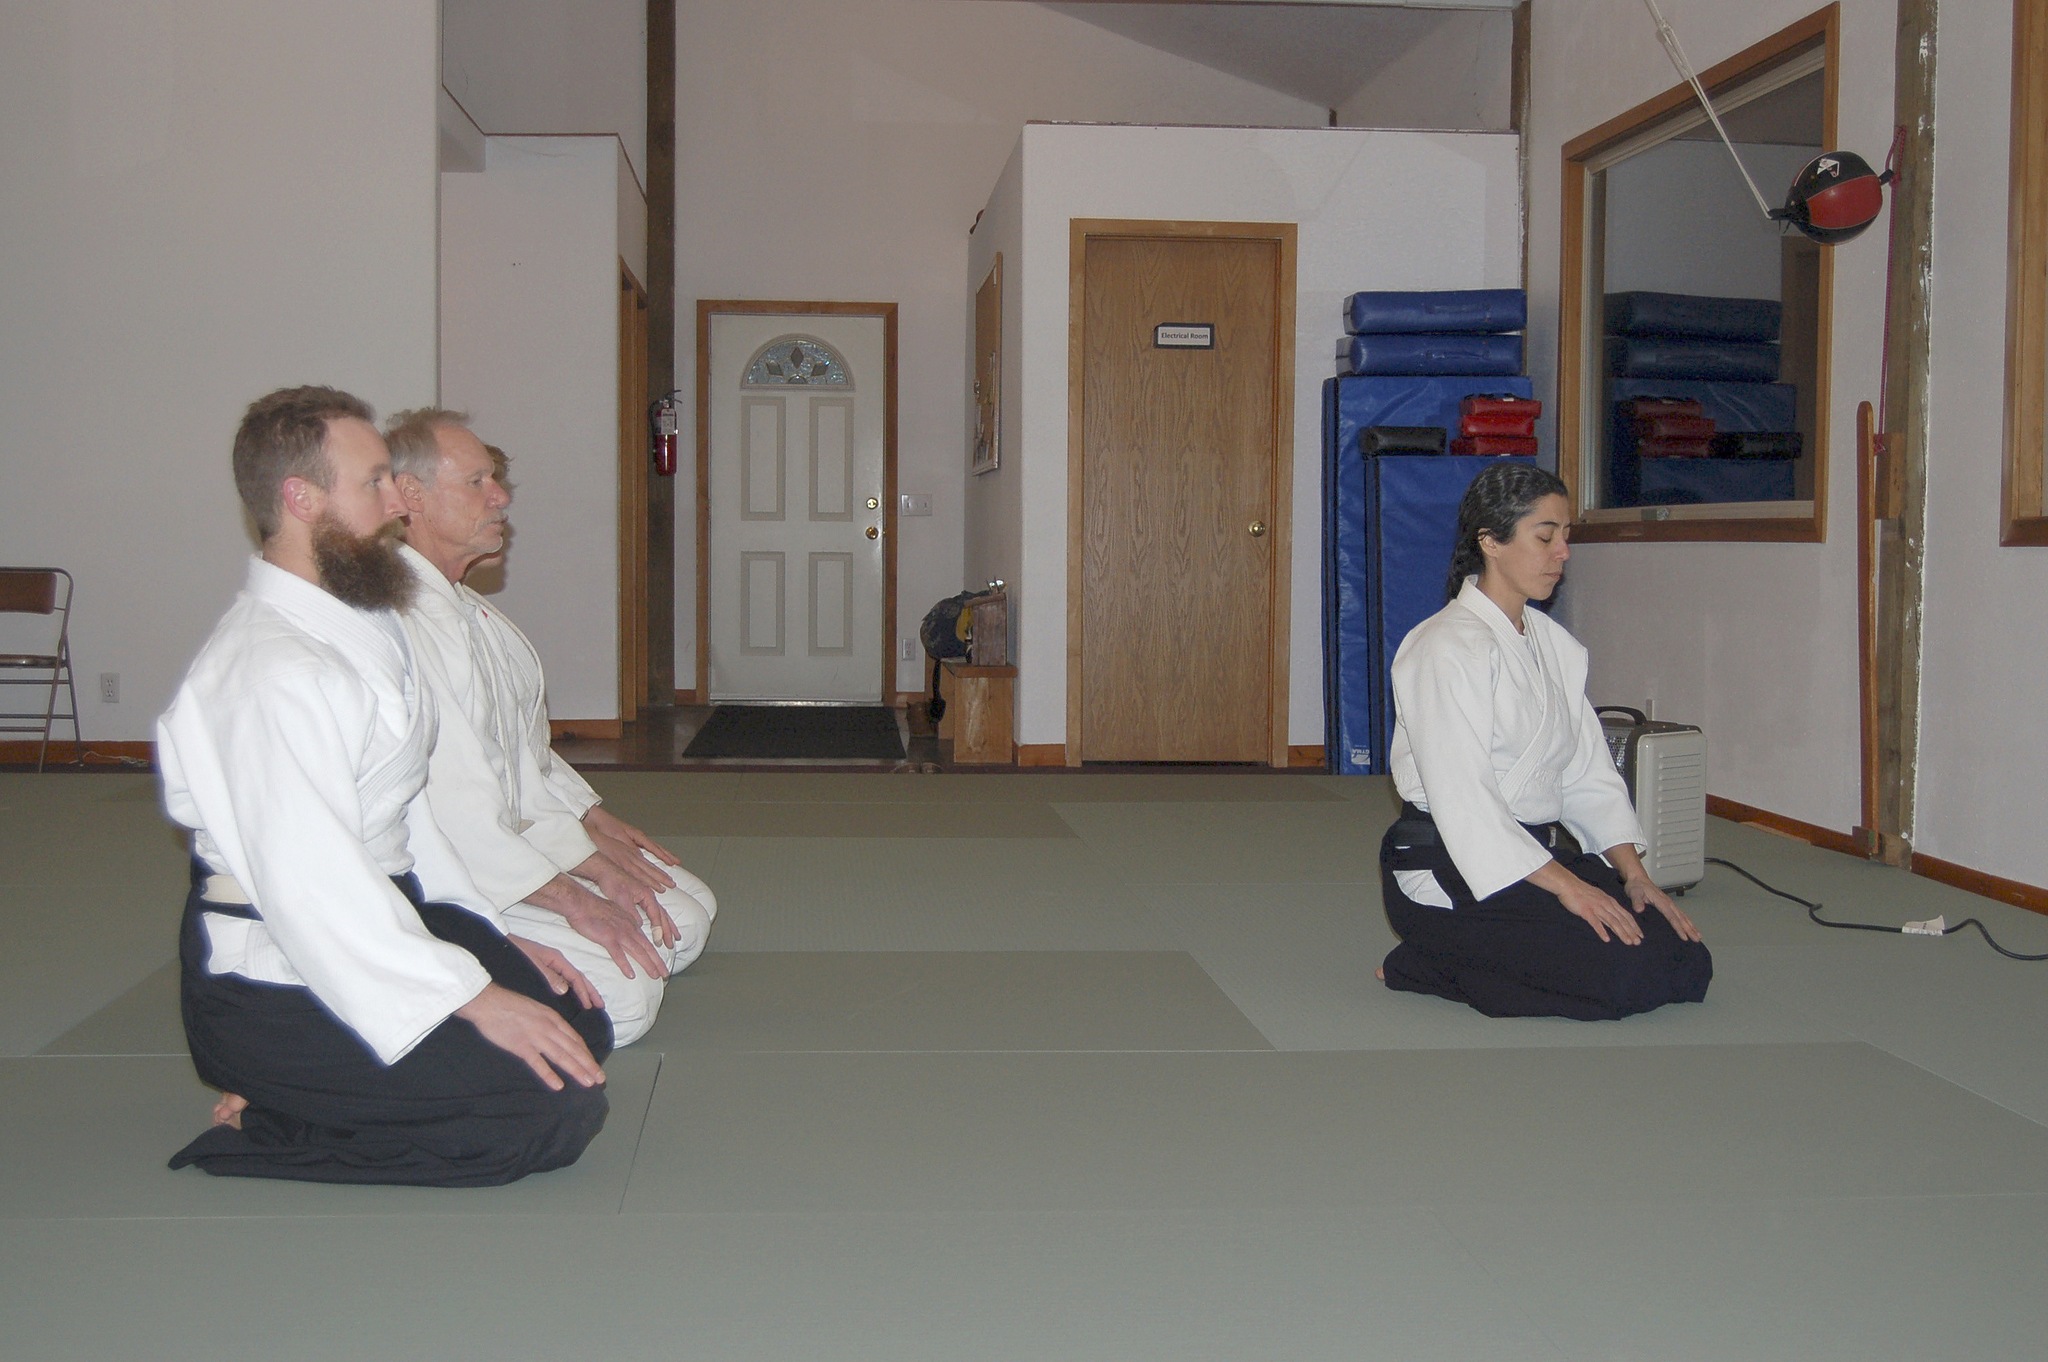 Chief Aikido instructor Neilu Naini leads her students, from left, James Burtle, Andy Brastad and William Jevne during a warm-up exercise at the Aikido Dojo off Carlsborg Road in Sequim. Sequim Gazette photos by Erin Hawkins